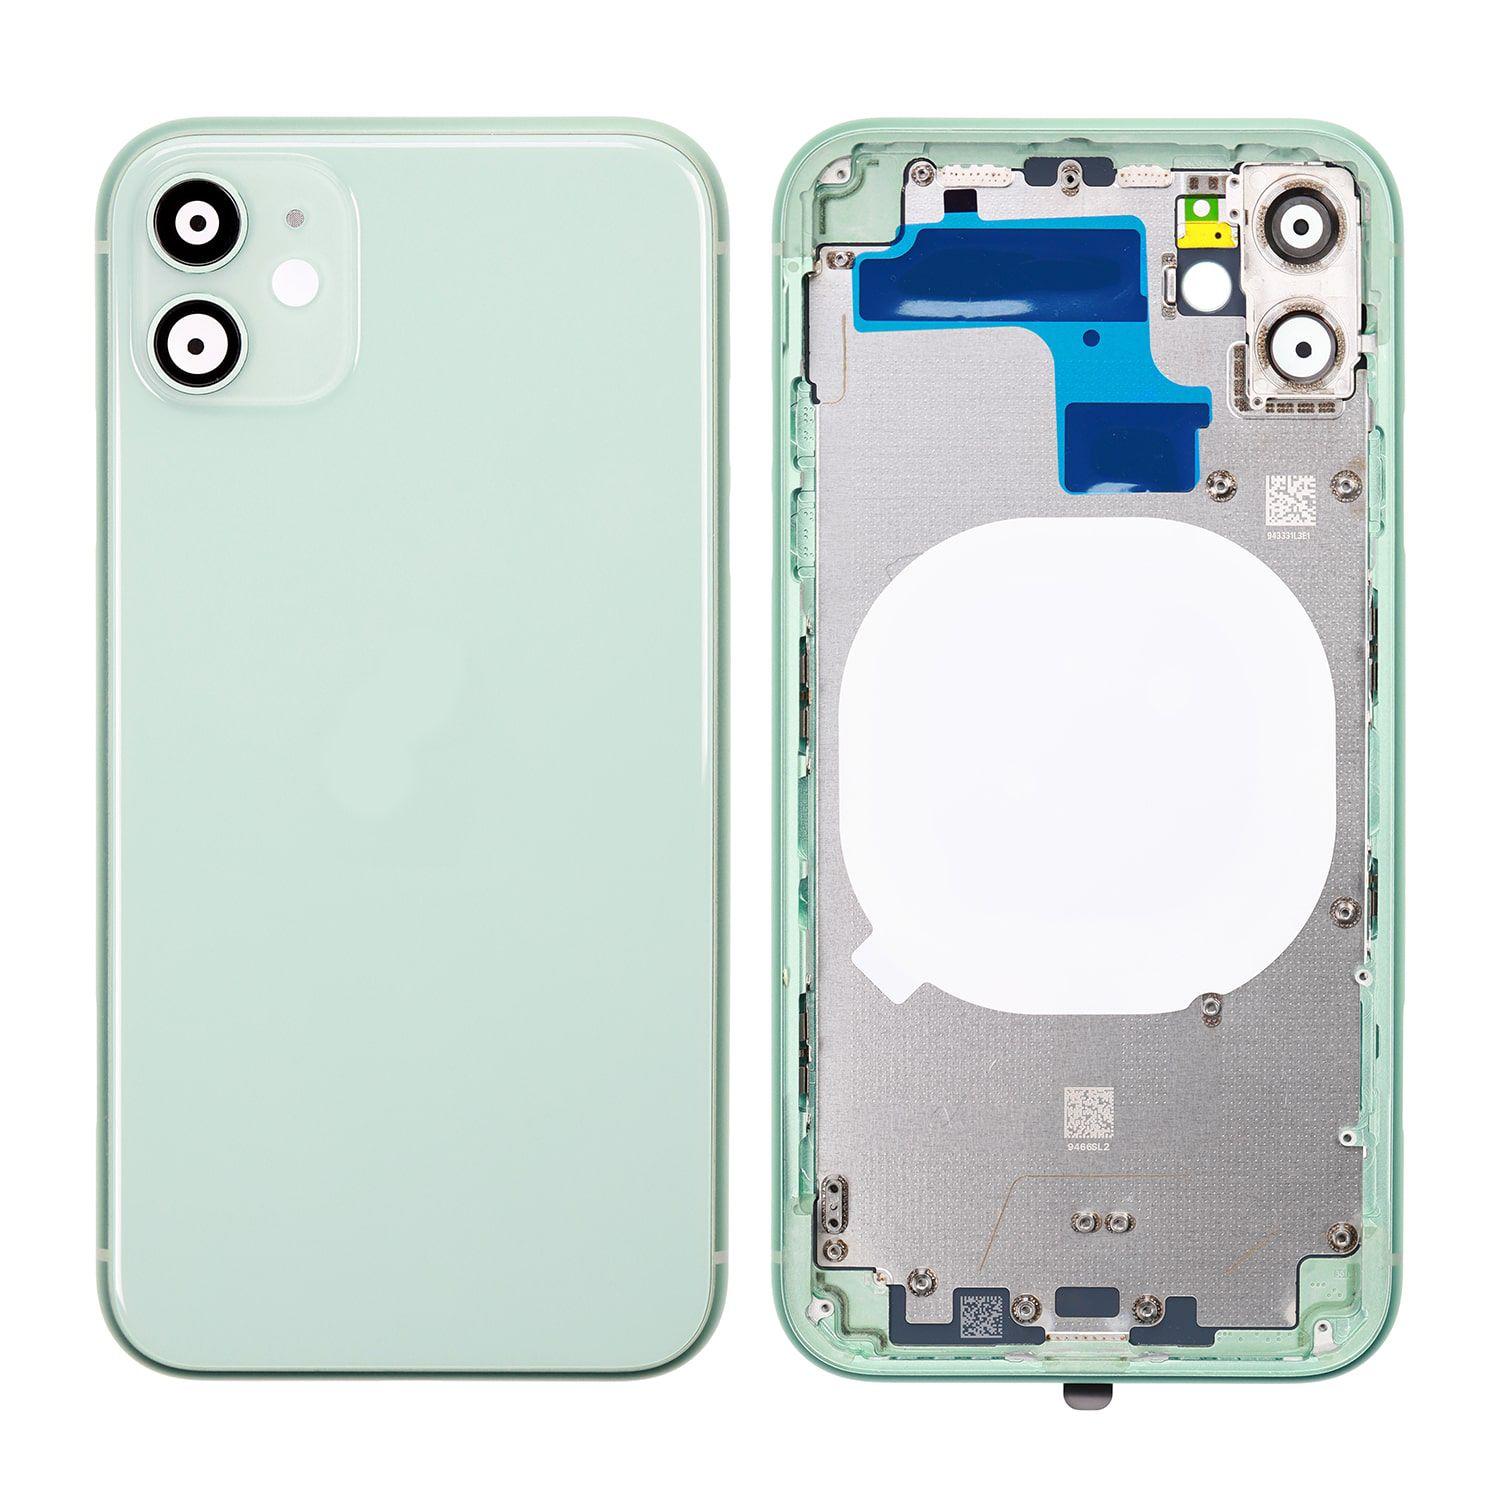 Body for iPhone 11 + back cover green